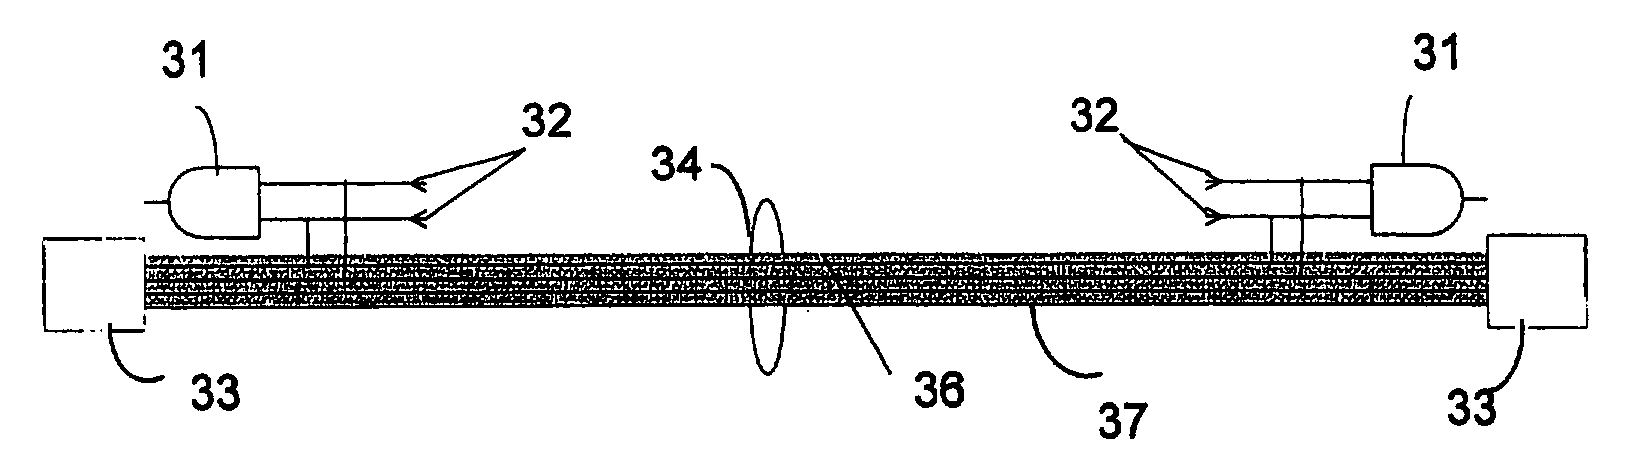 Method and apparatus for tracking remote ends of networking cables